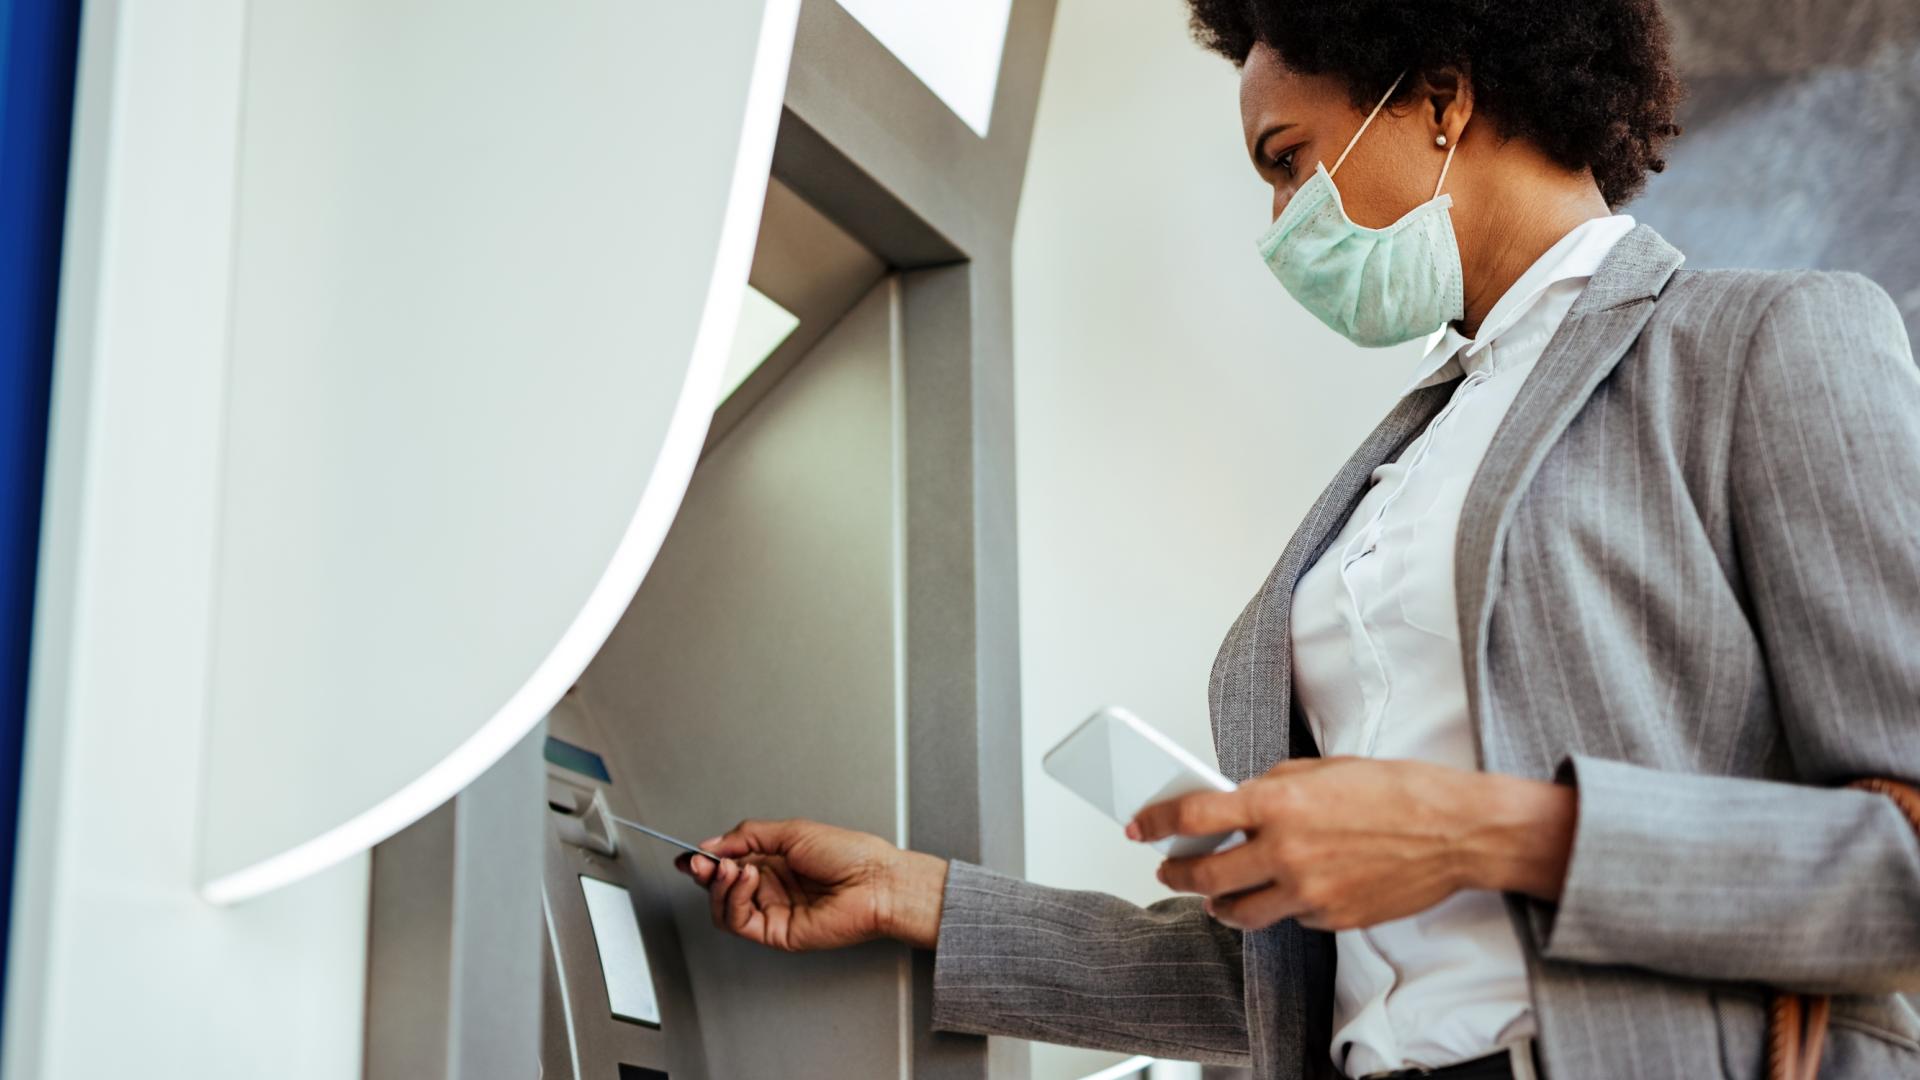 An image of a woman in a mask using an ATM